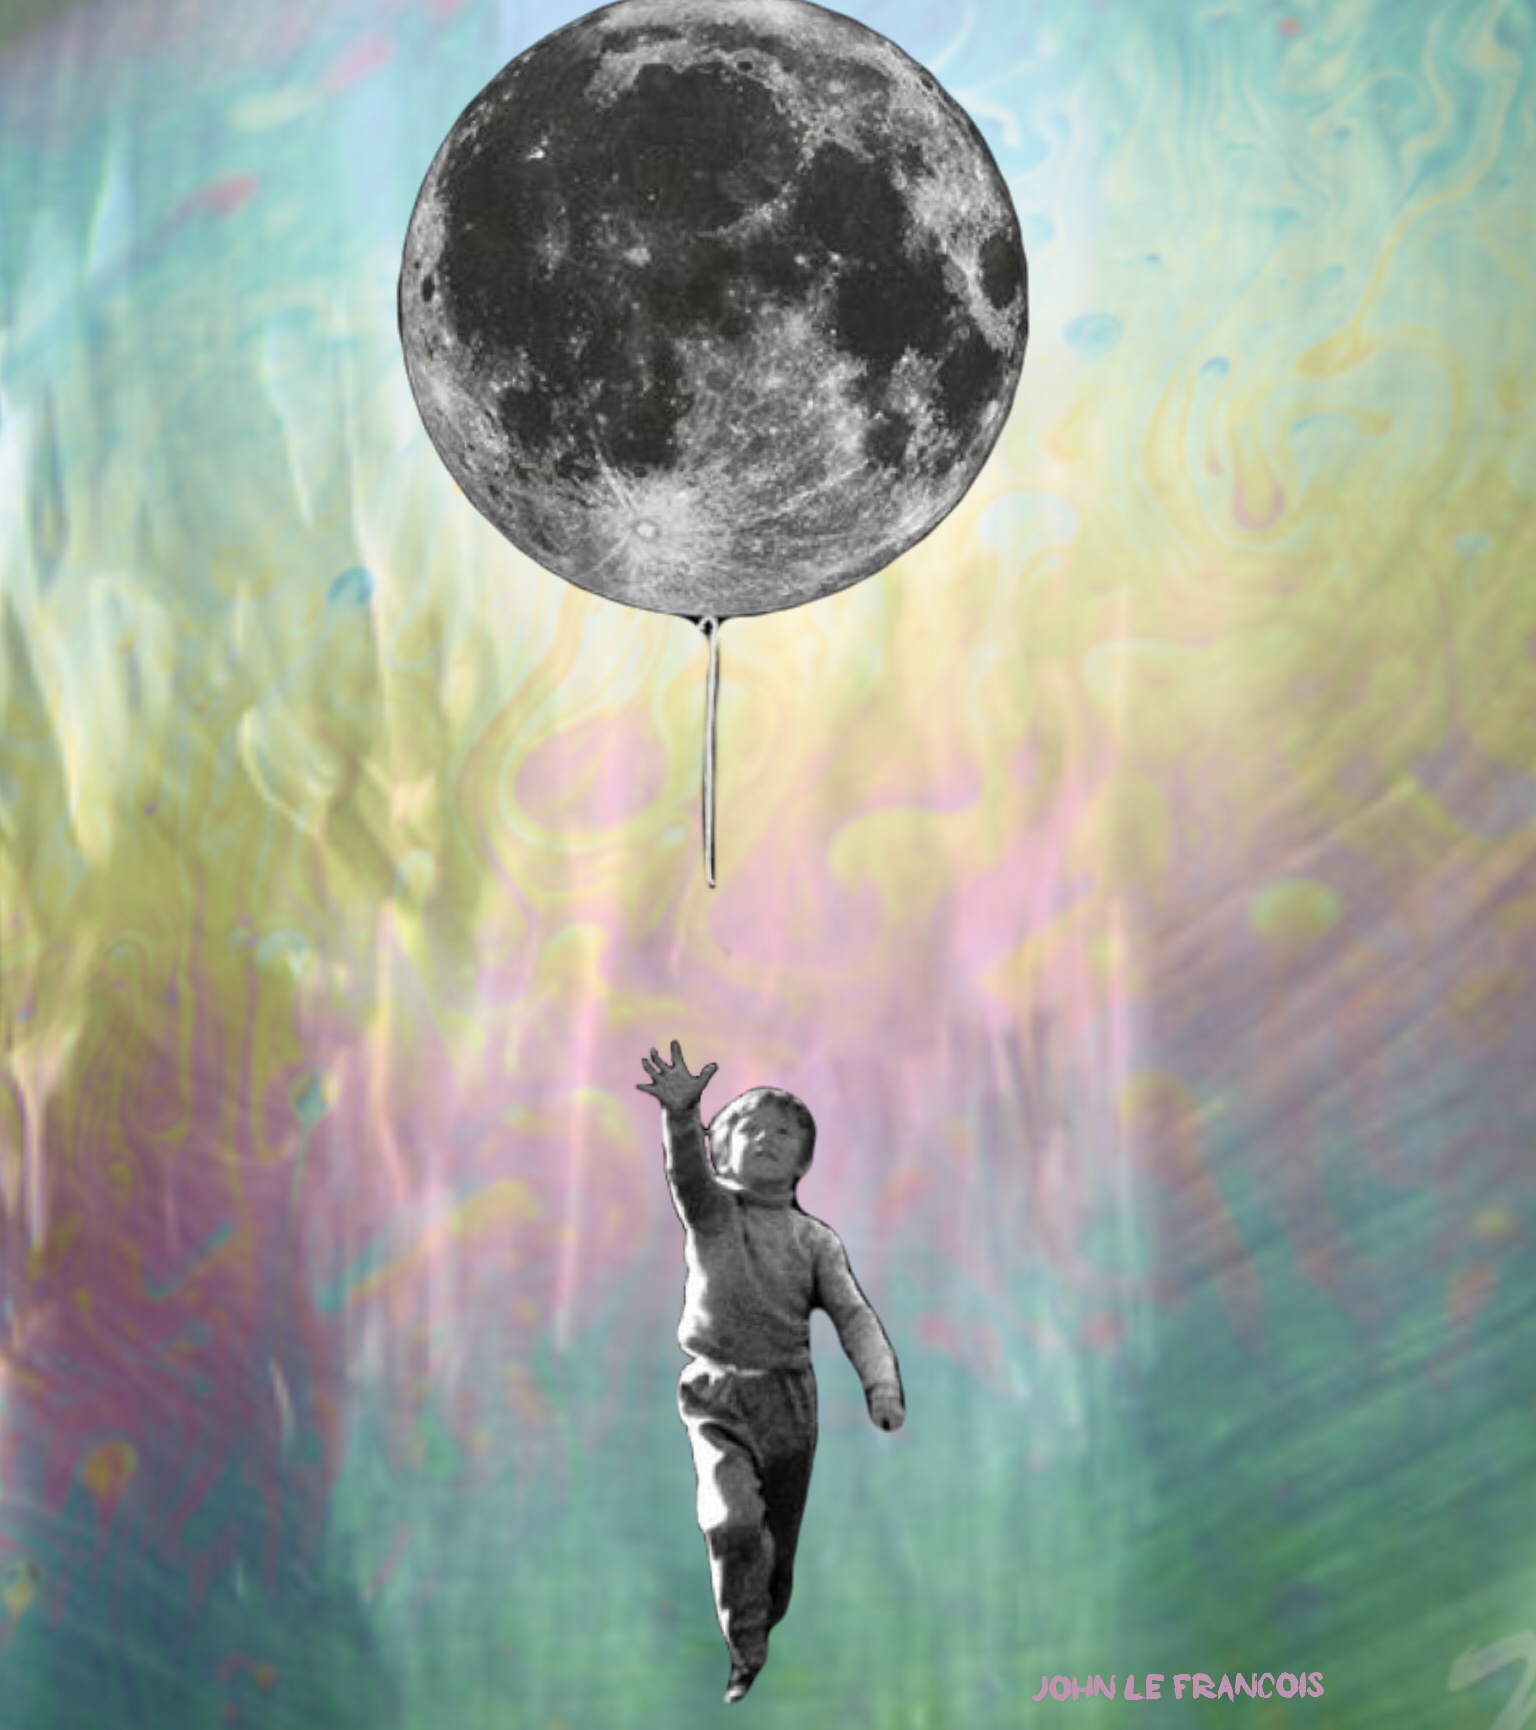 Reaching for the moon made with Bazaart